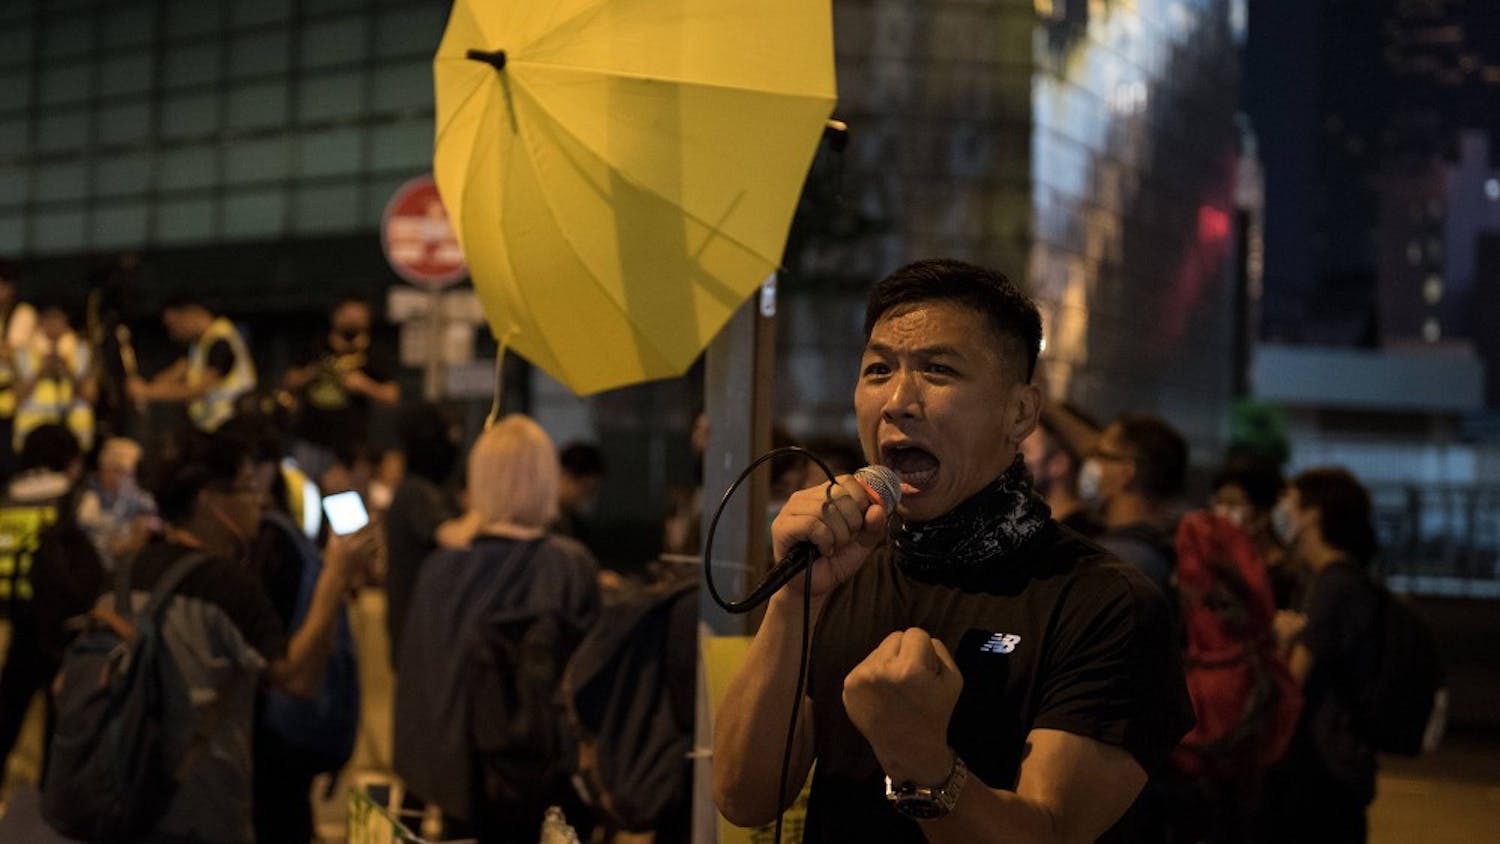 A protester shouts various slogans during a demonstration in Hong Kong. Demonstrators gathered for an anti-authoritarian rally that marked the fifth anniversary of the beginning of the 2014 &quot;Umbrella Movement.&quot; Thousands of protesters gathered peacefully, but minor clashes between protesters and police escalated through the night, leading to a police dispersal operation.